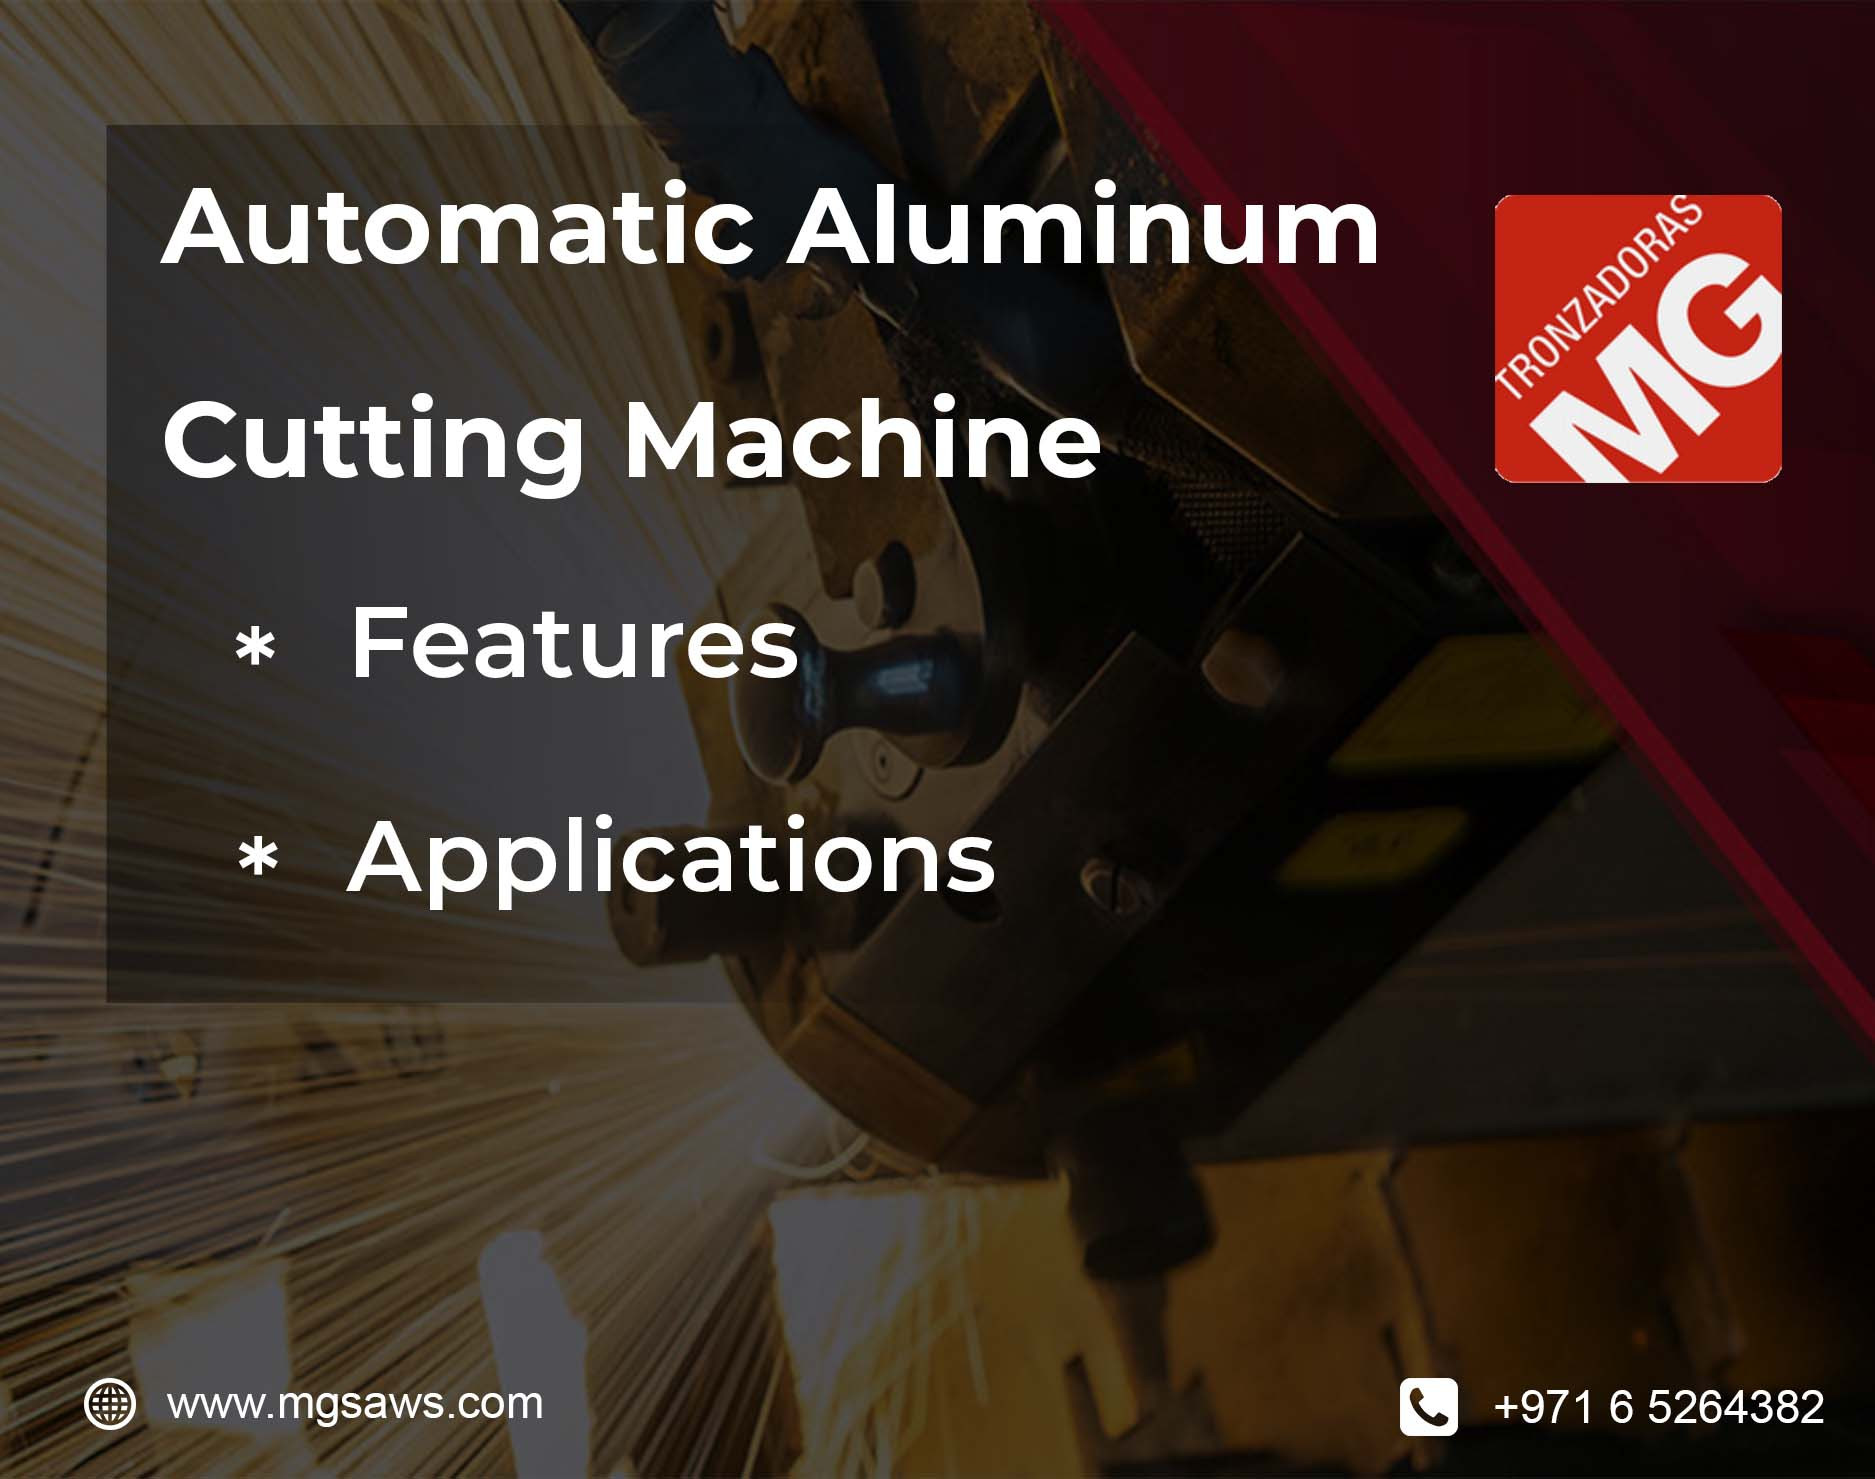 Features And Applications of Automatic Aluminum Cutting Machine